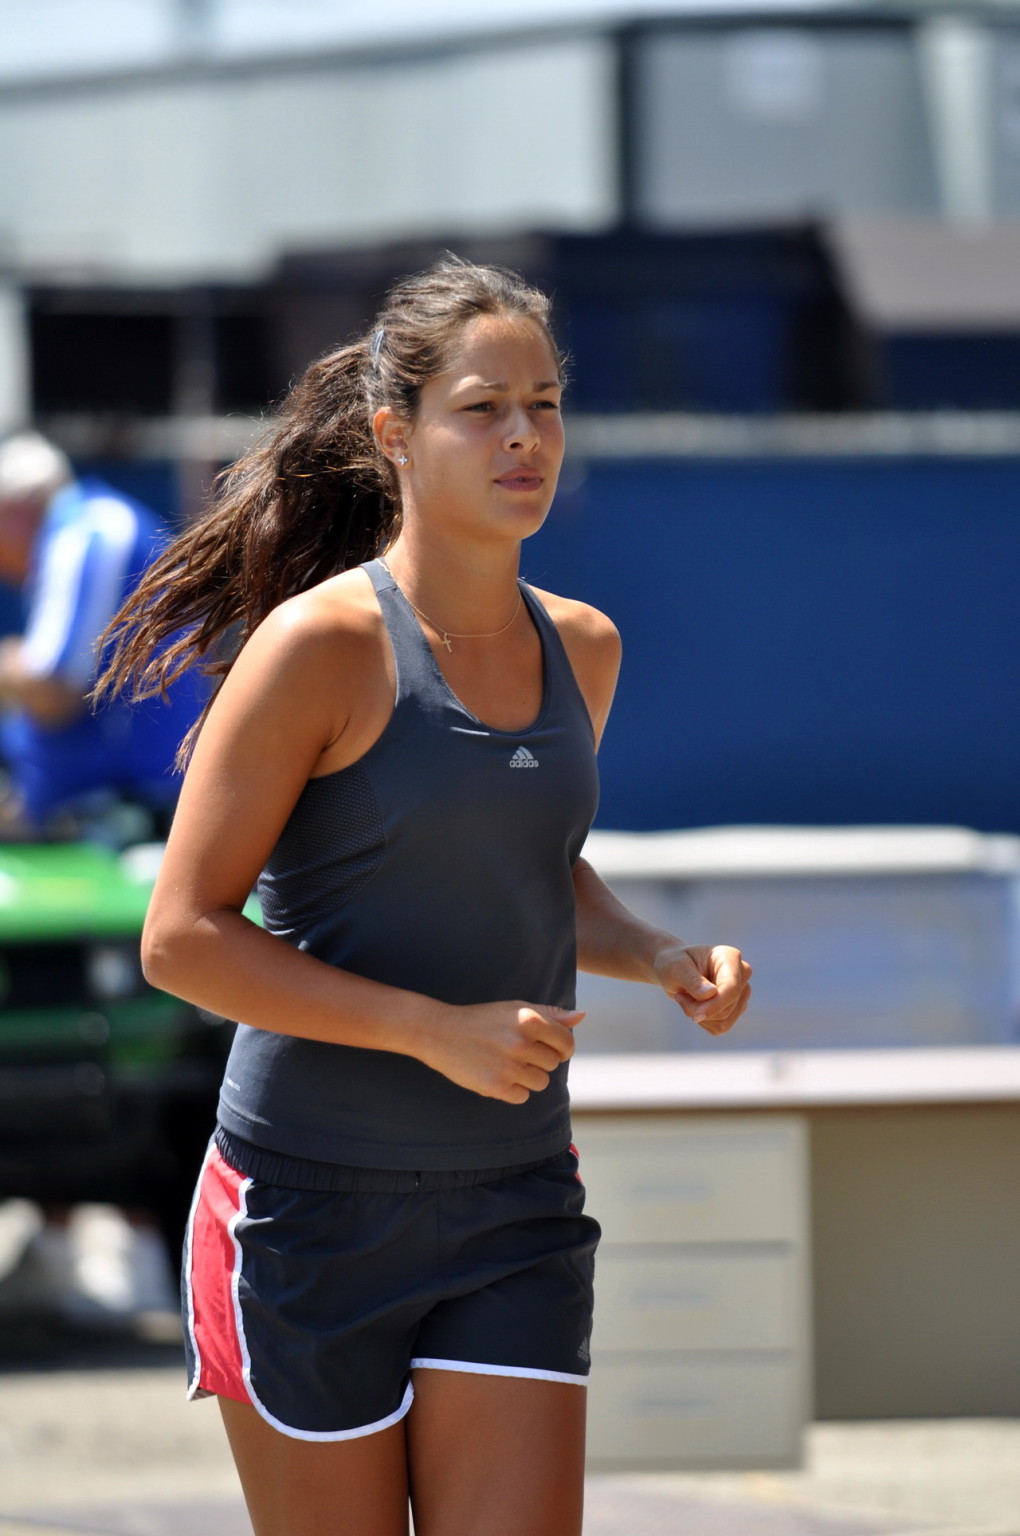 Ana Ivanovic leggy  shows pokies in sweaty workout gear practicing for Western   #75336644